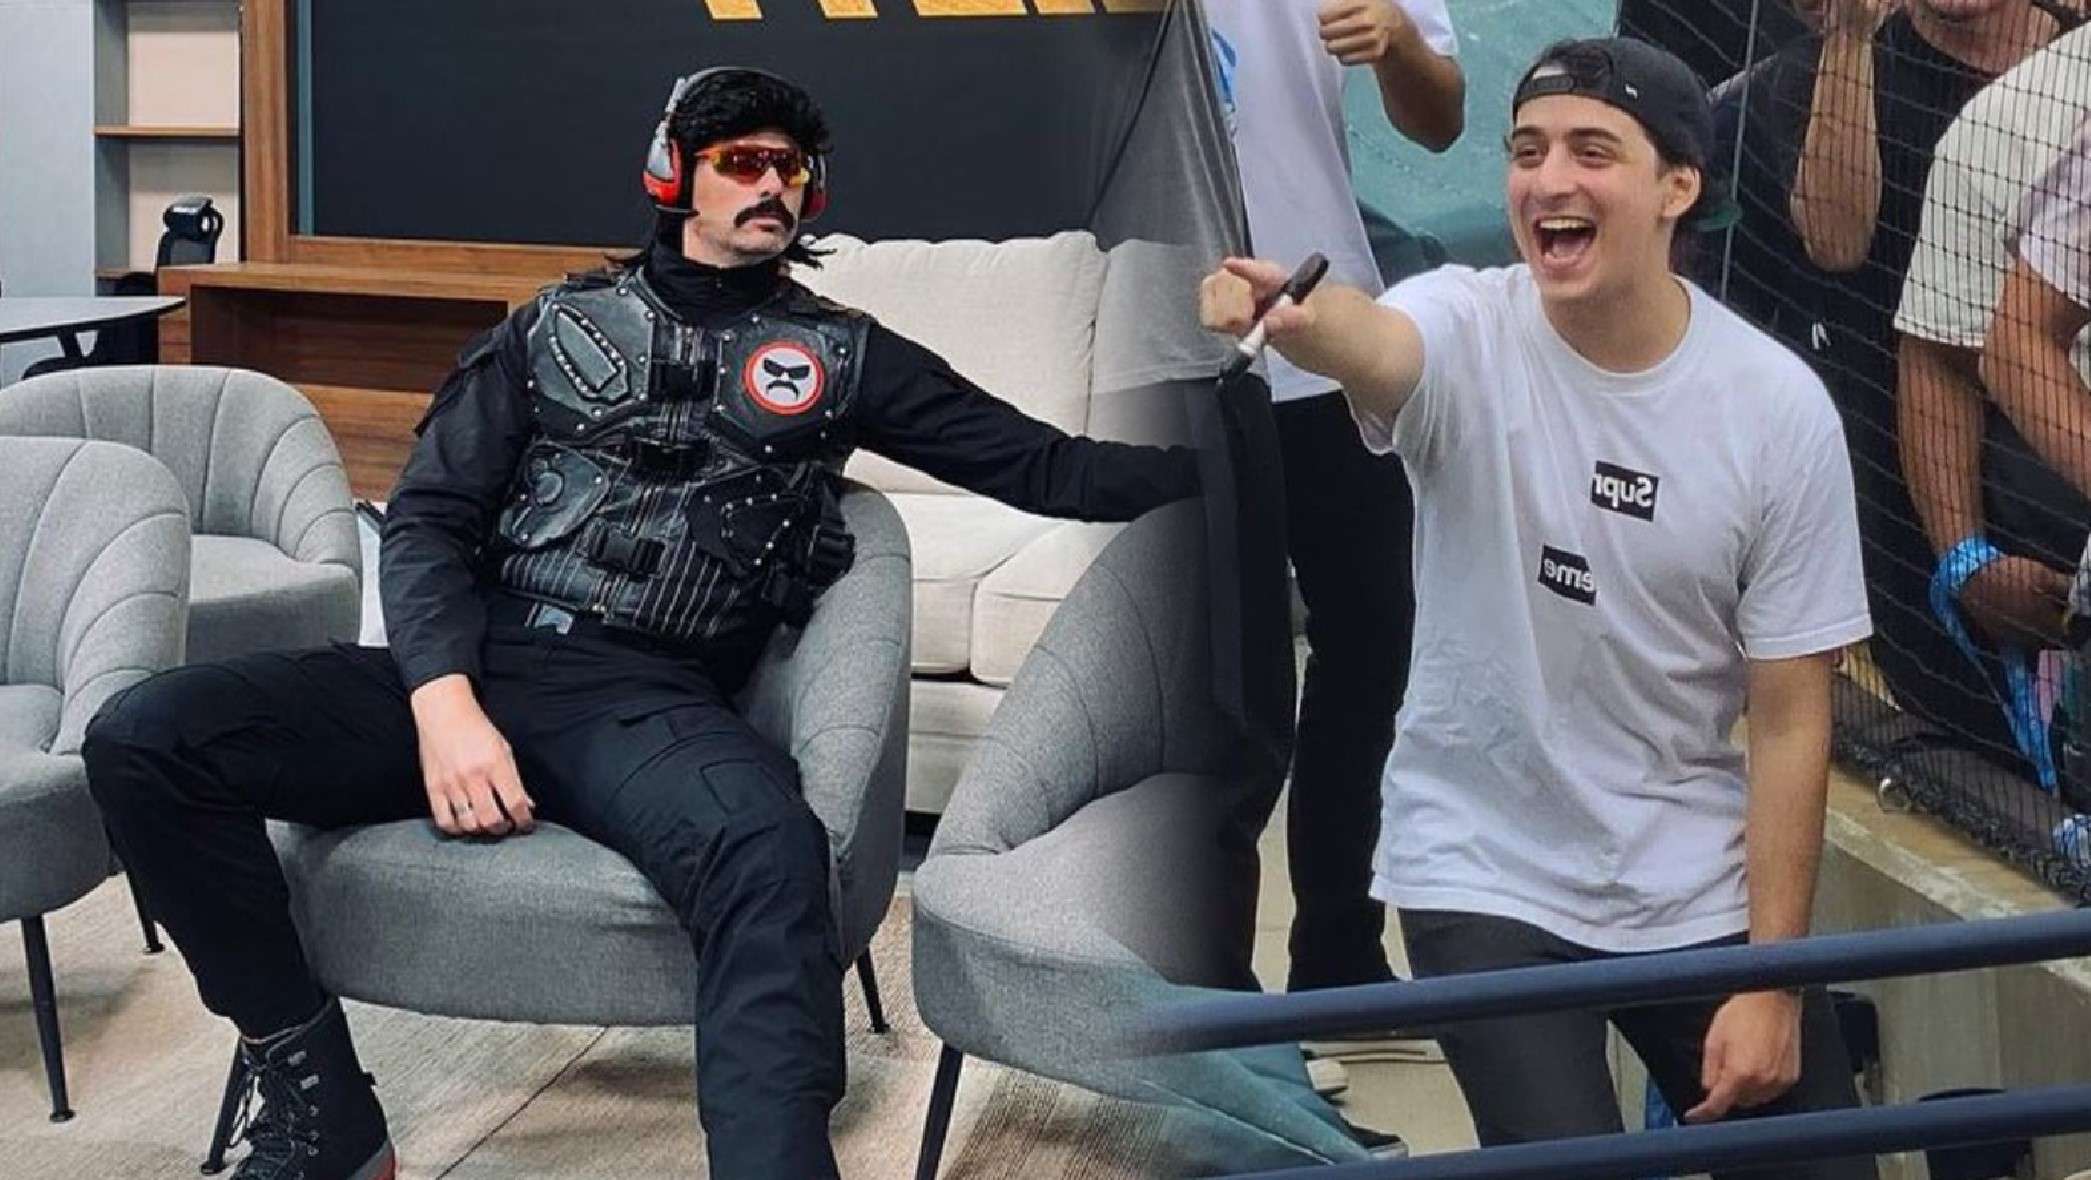 DrDisrespect next to Cloakzy